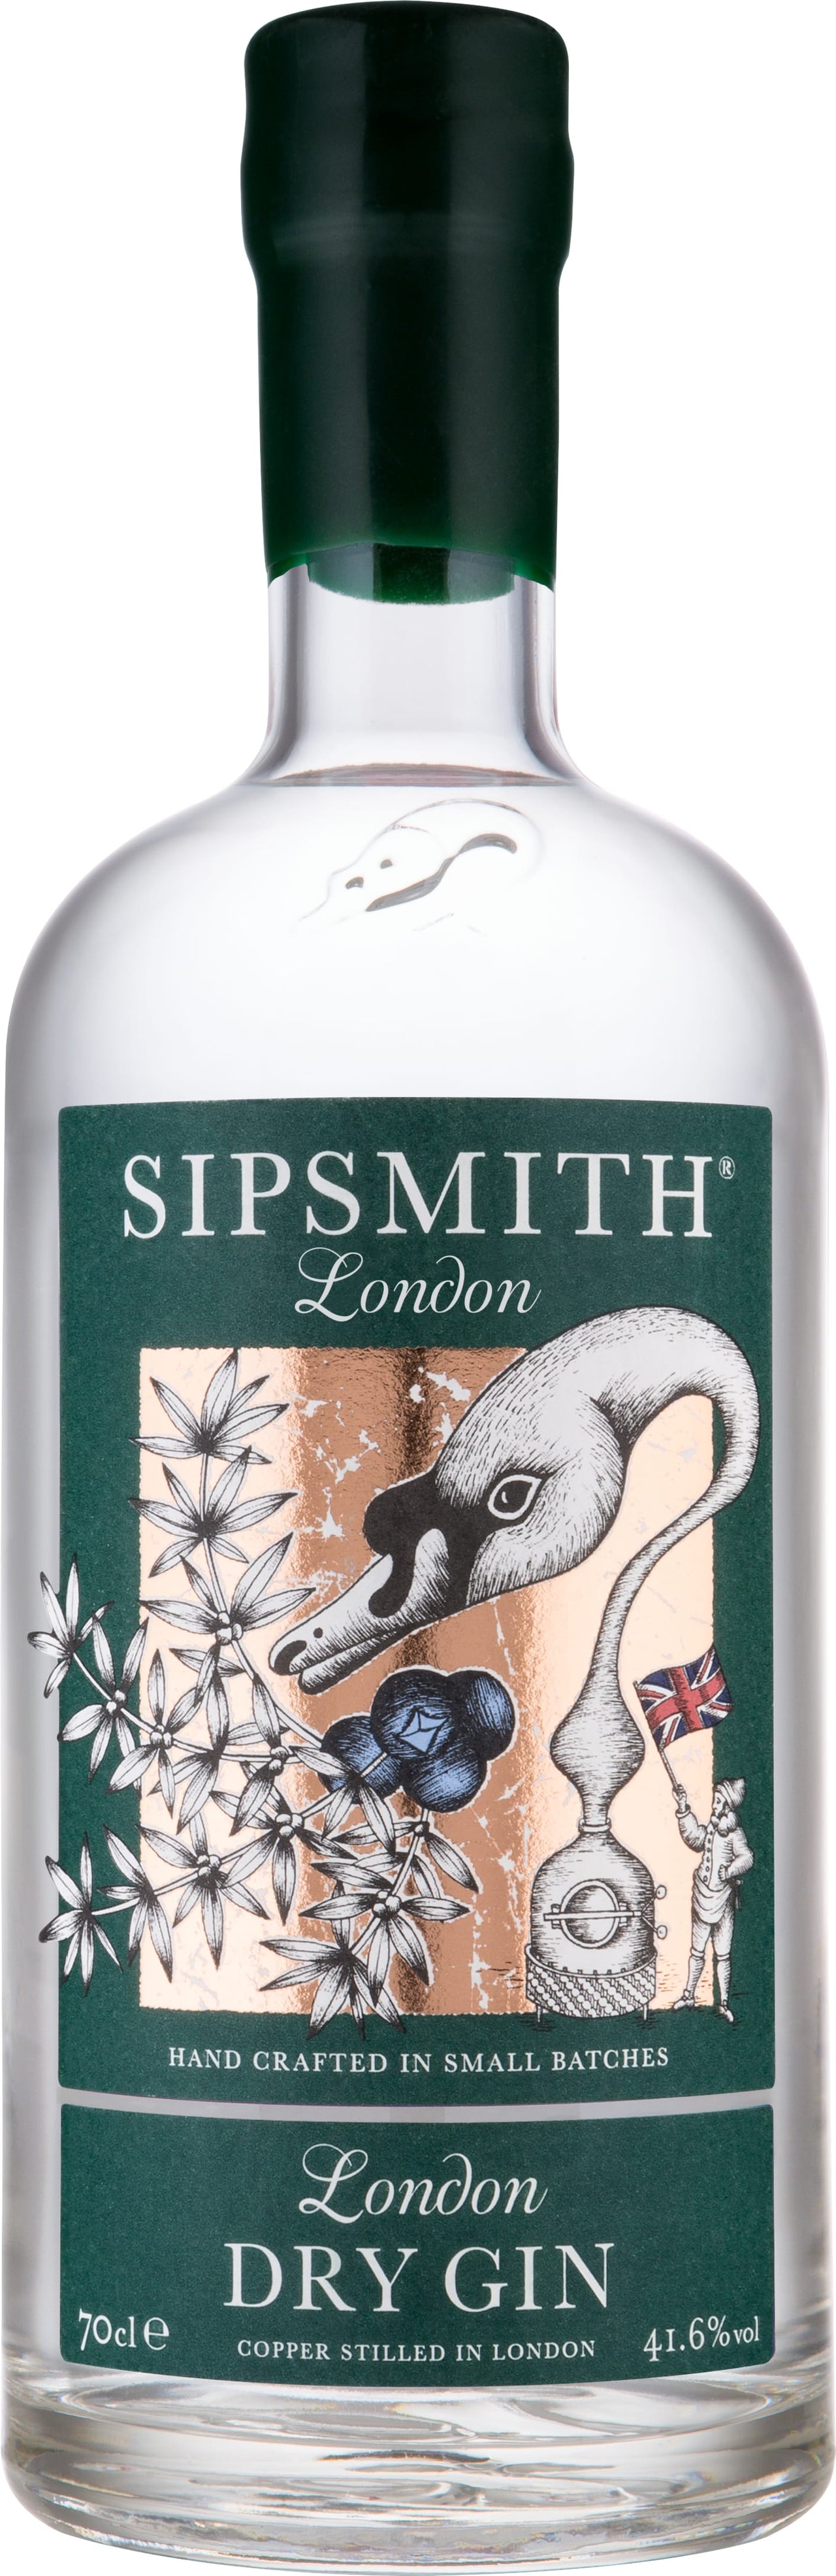 Sipsmith London Dry Gin 70cl NV - Buy Sipsmith Wines from GREAT WINES DIRECT wine shop